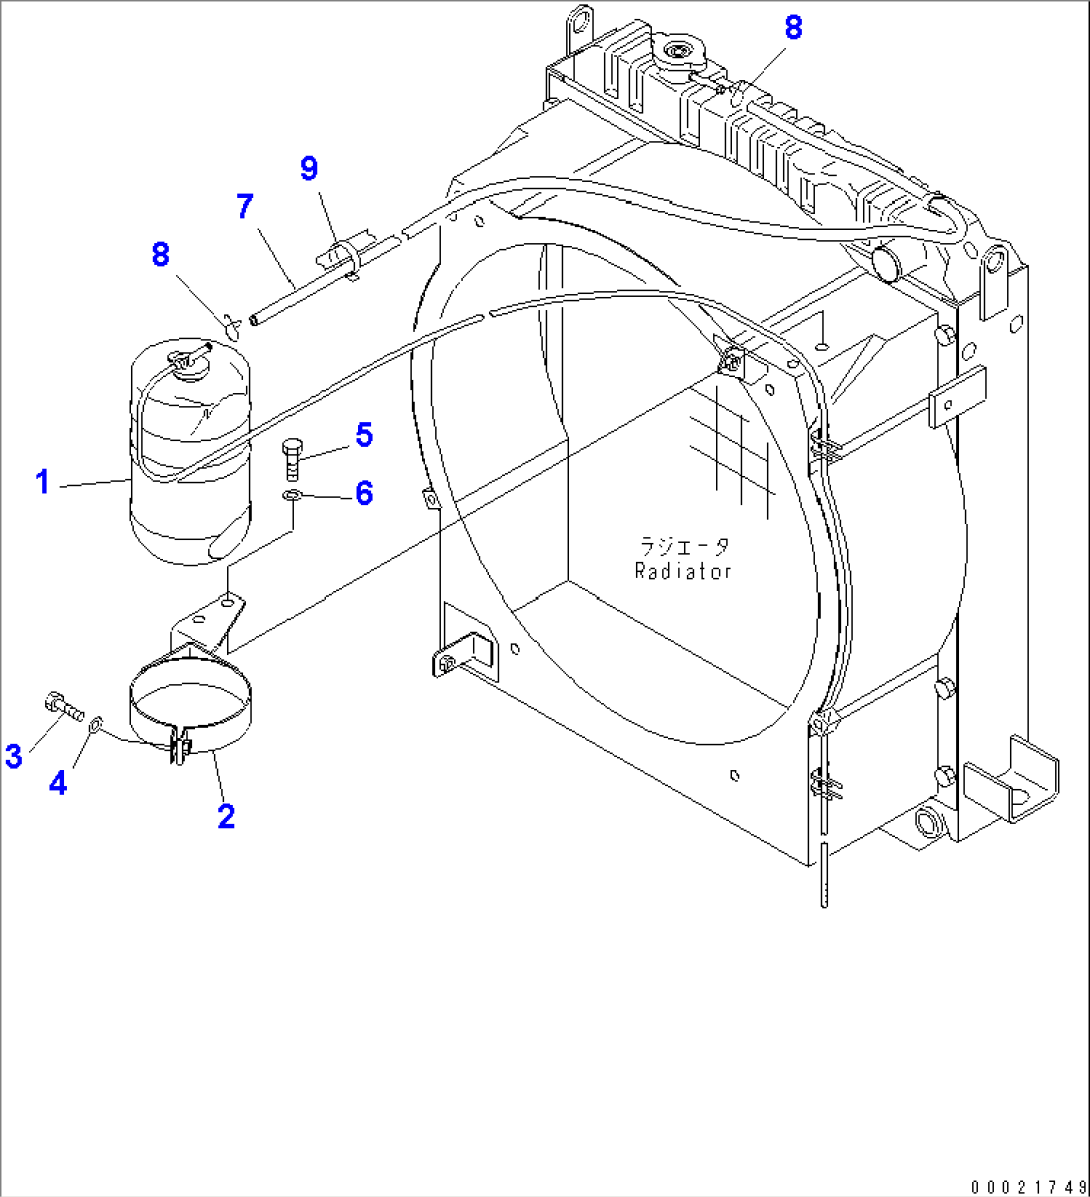 RADIATOR (RESERVE TANK AND PIPING)(#11501-11507)